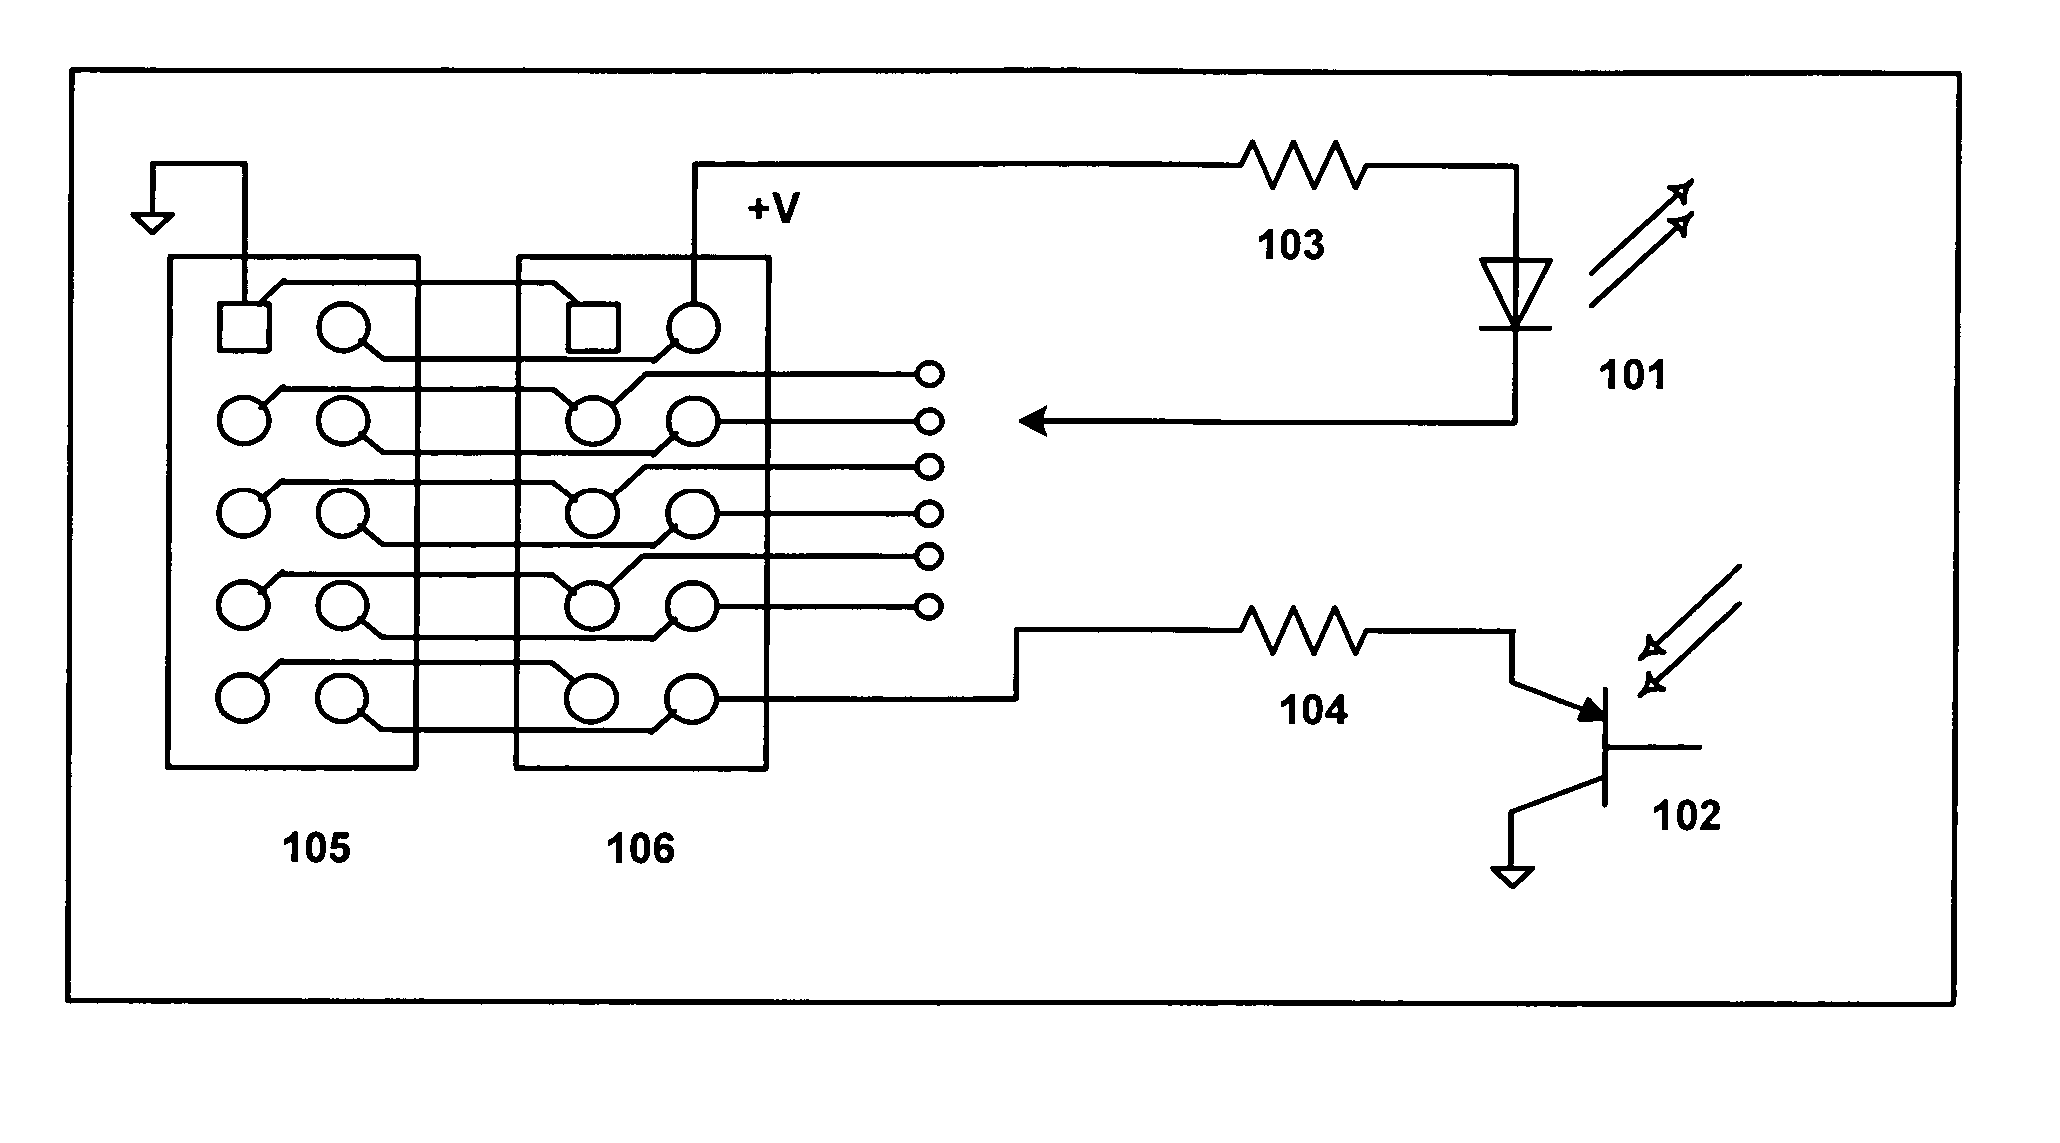 Configurable power control system